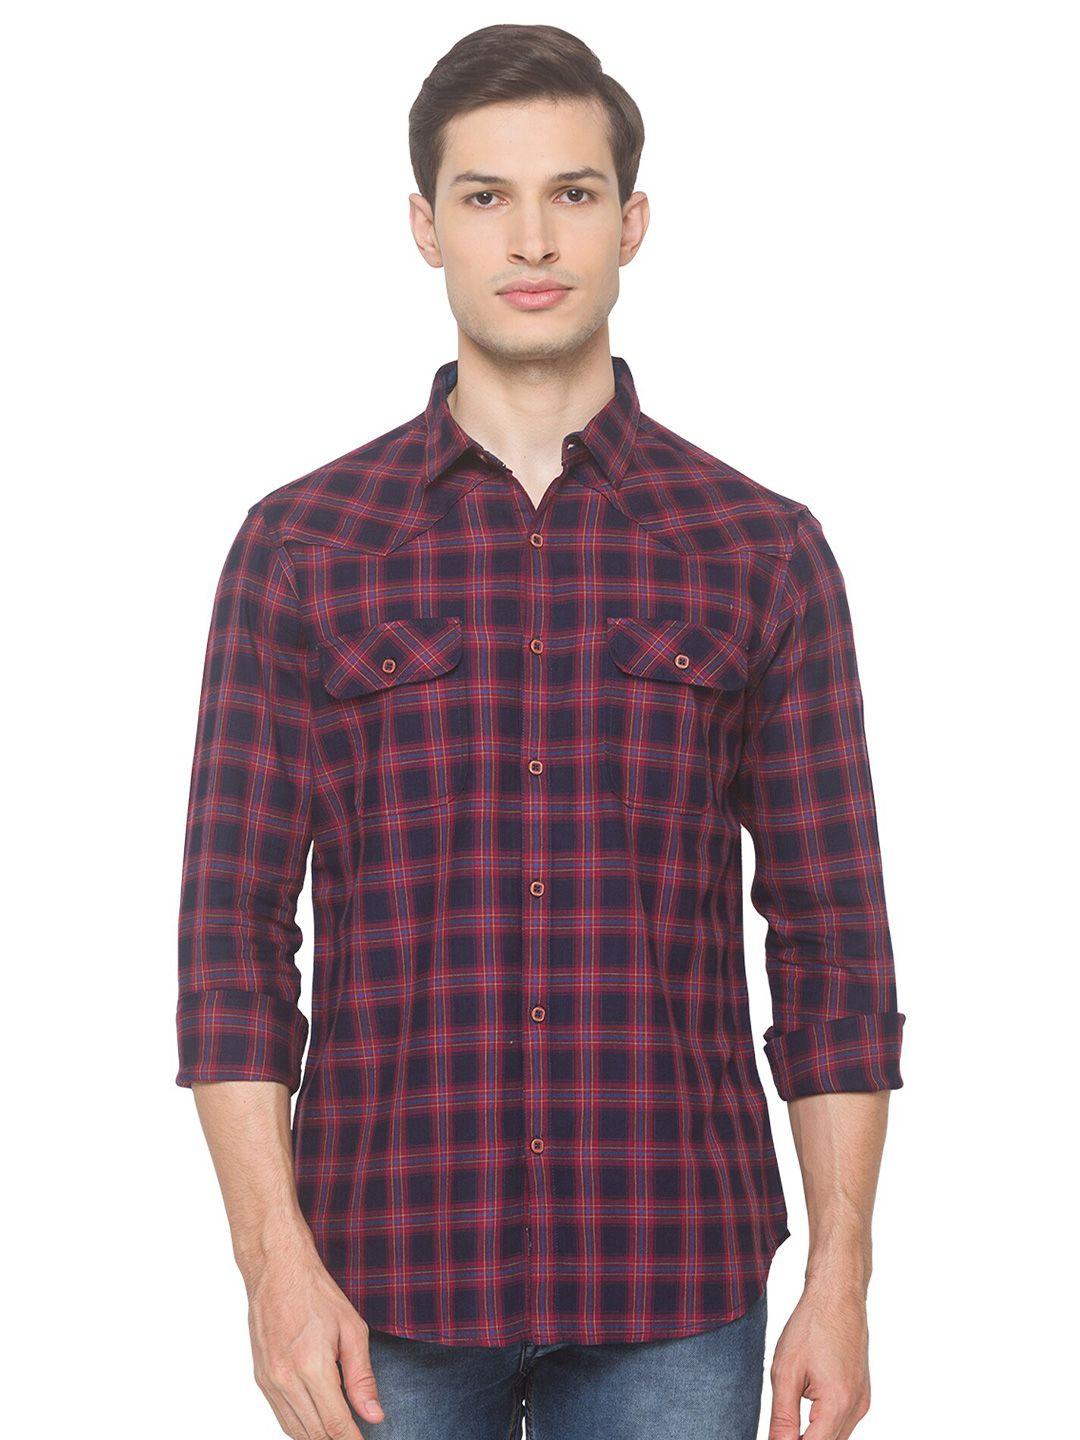 snx-checked-classic-tailored-fit-pure-cotton-casual-shirt